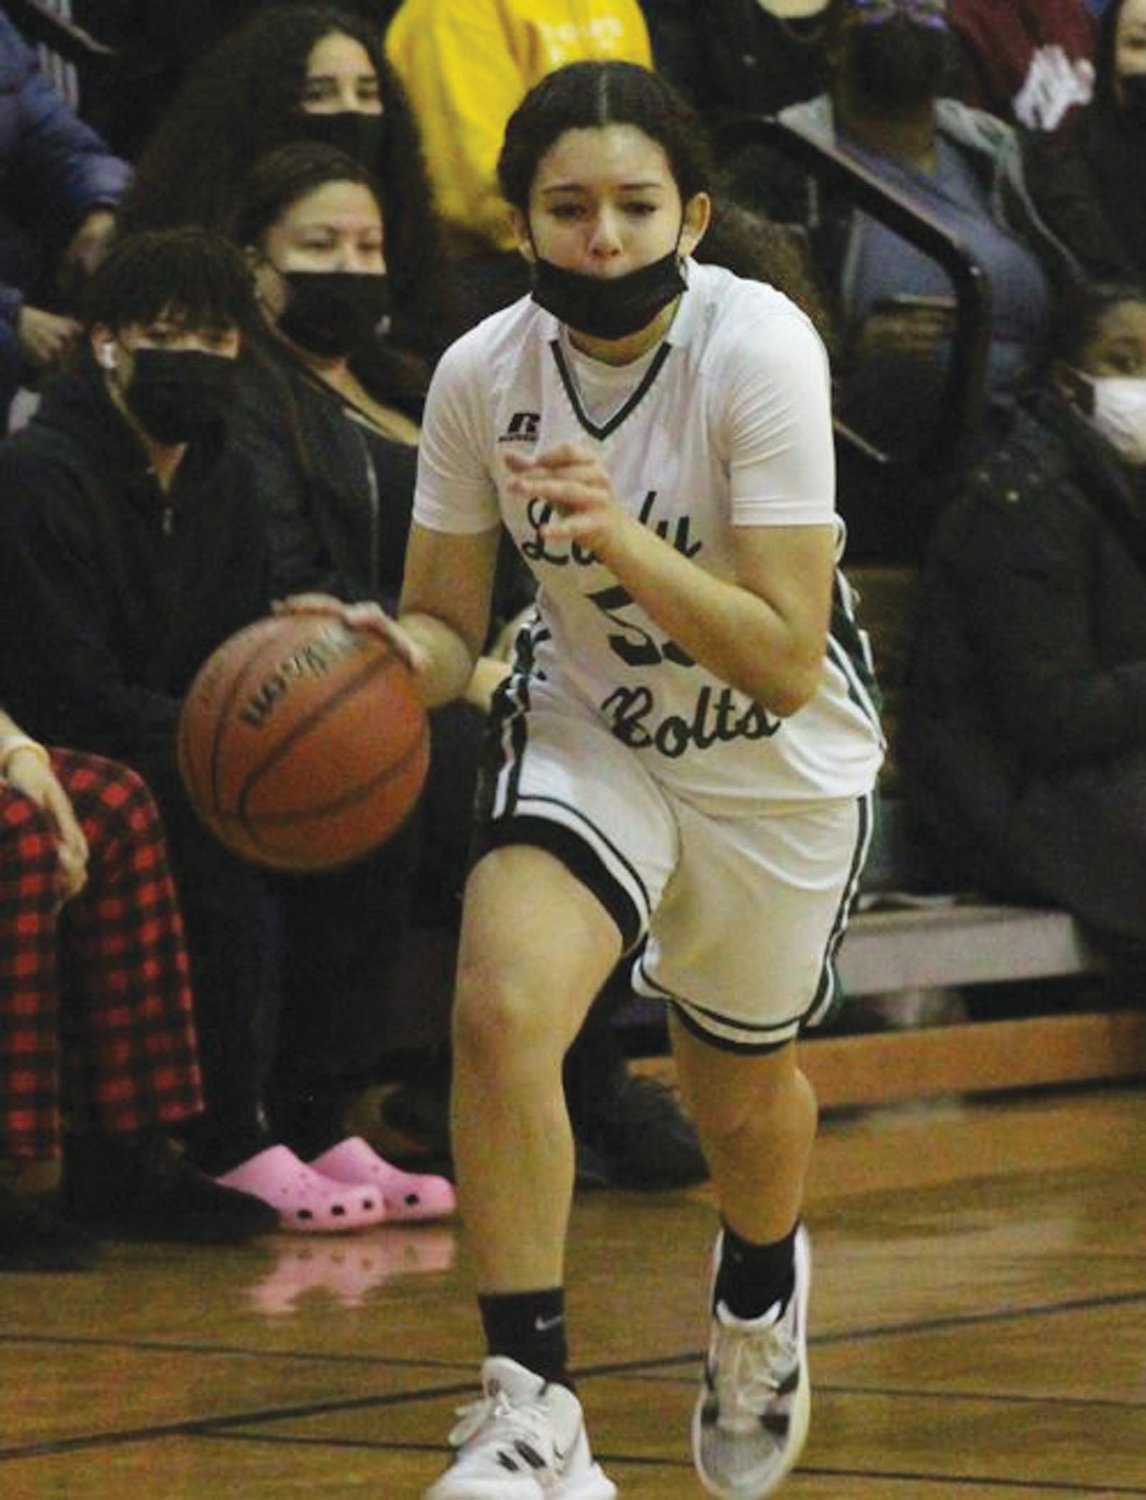 PLAYOFF HOOPS:
Cranston East’s Bella
Dupret dribbles the ball up
the court against Juanita
Sanchez on Monday night
in Providence. The secondseeded
Cavs dealt East a
54-27 defeat and will move
on to the semifinals.